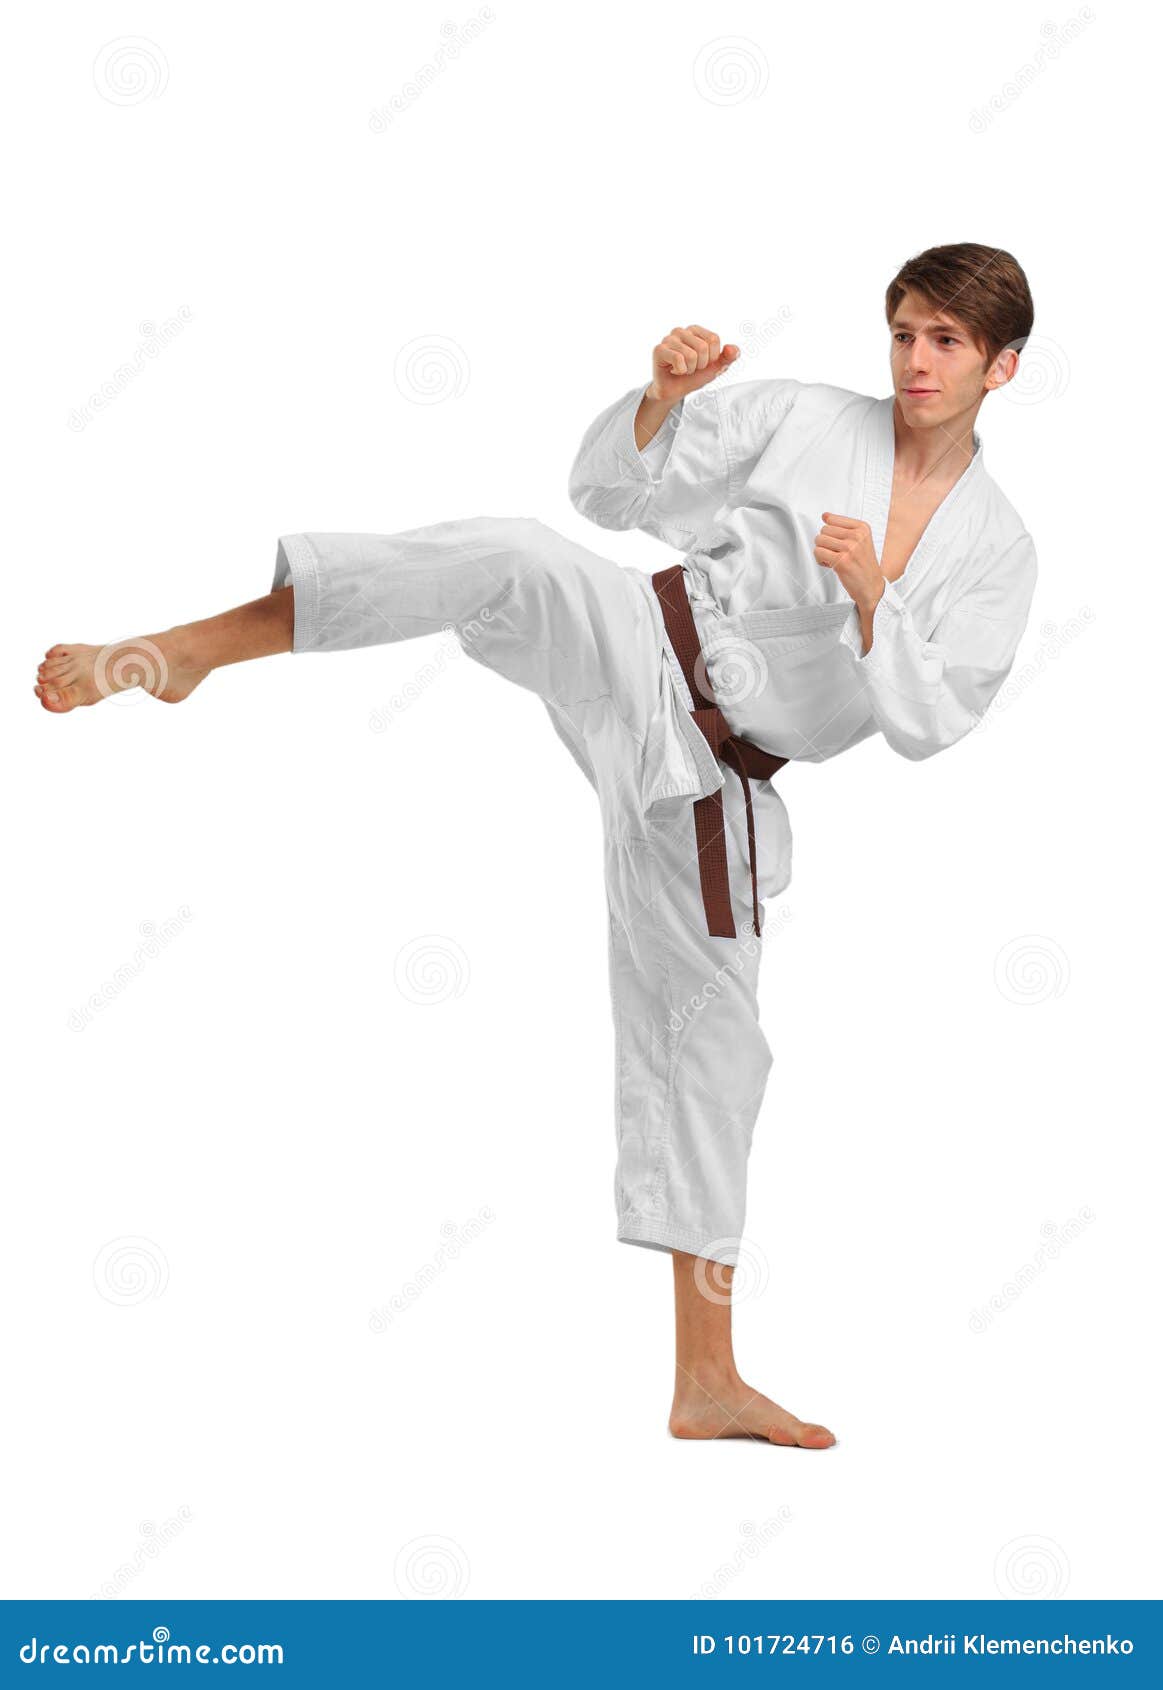 karate. a man is performing a punch.  on white background.